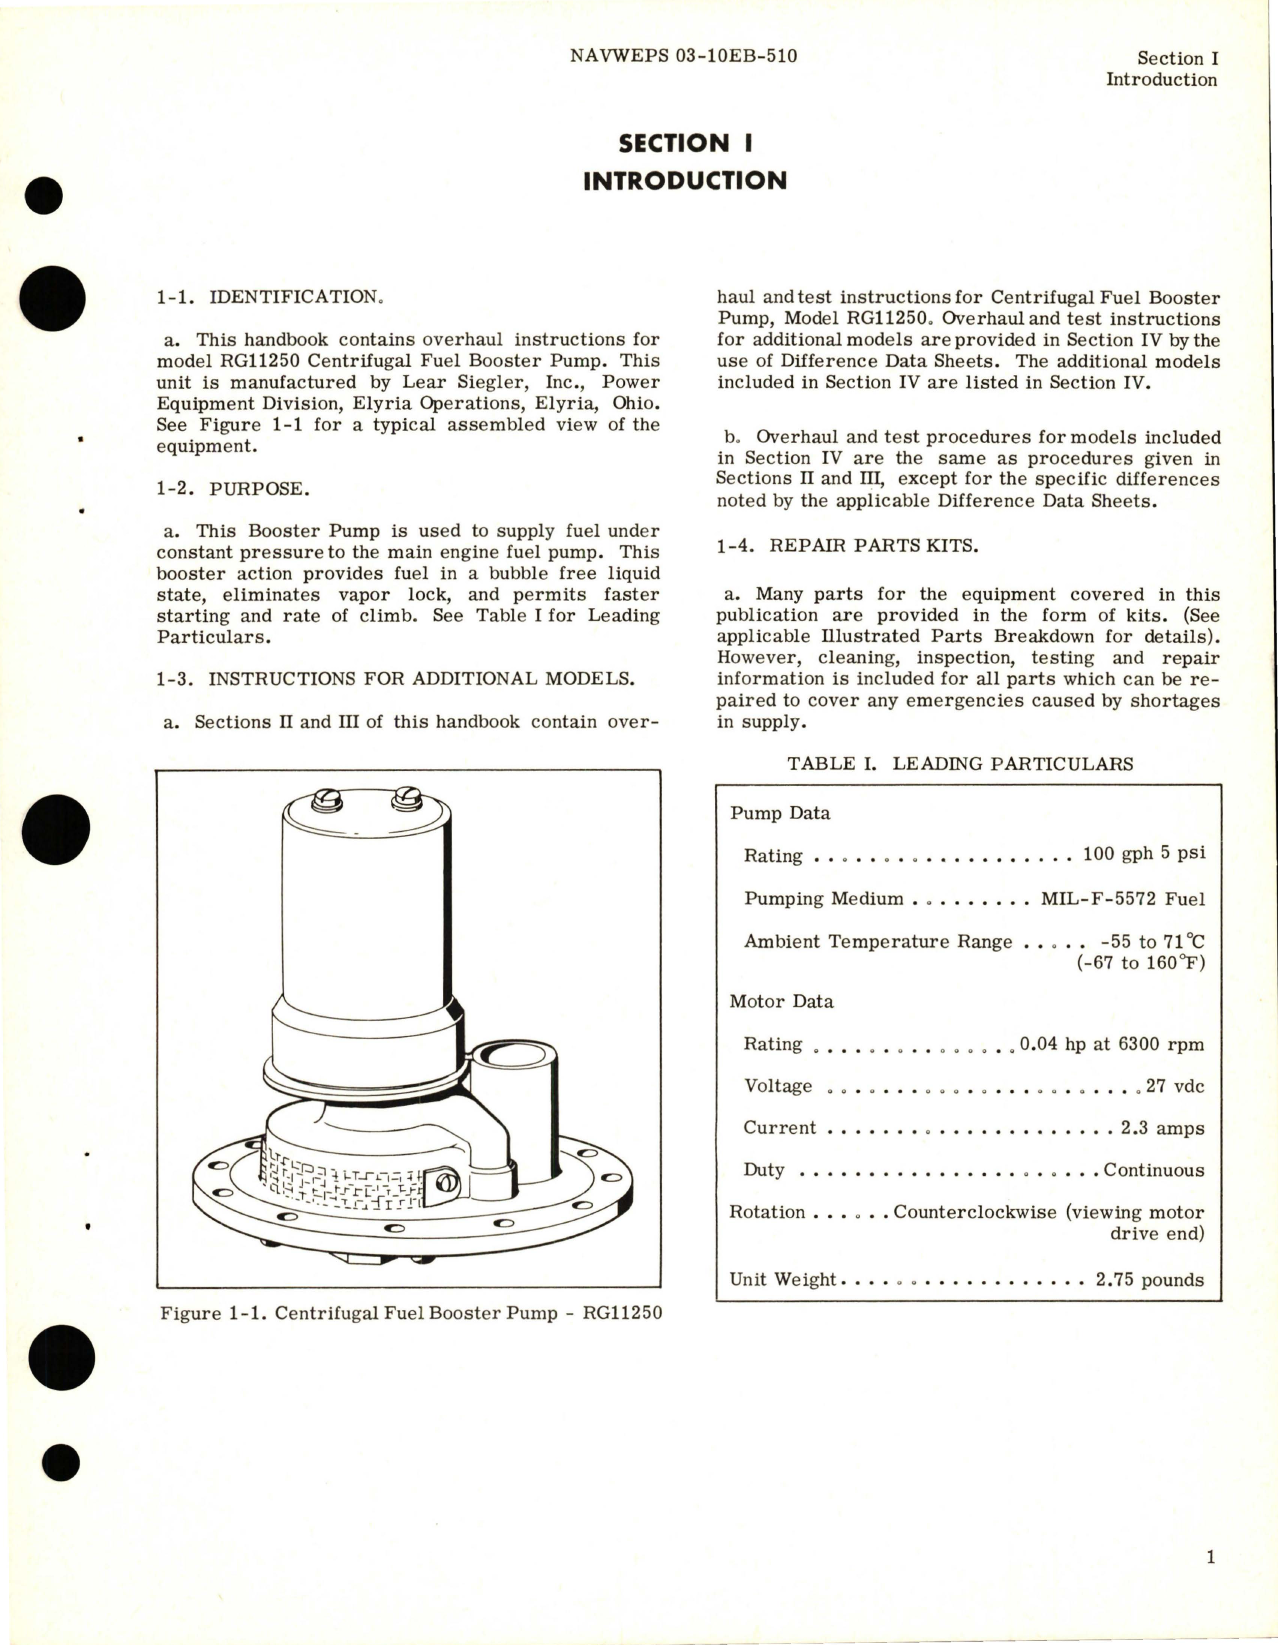 Sample page 5 from AirCorps Library document: Overhaul Instructions for Centrifugal Fuel Booster Pump - Models RG11250, RG11250A, and RG11250A1 